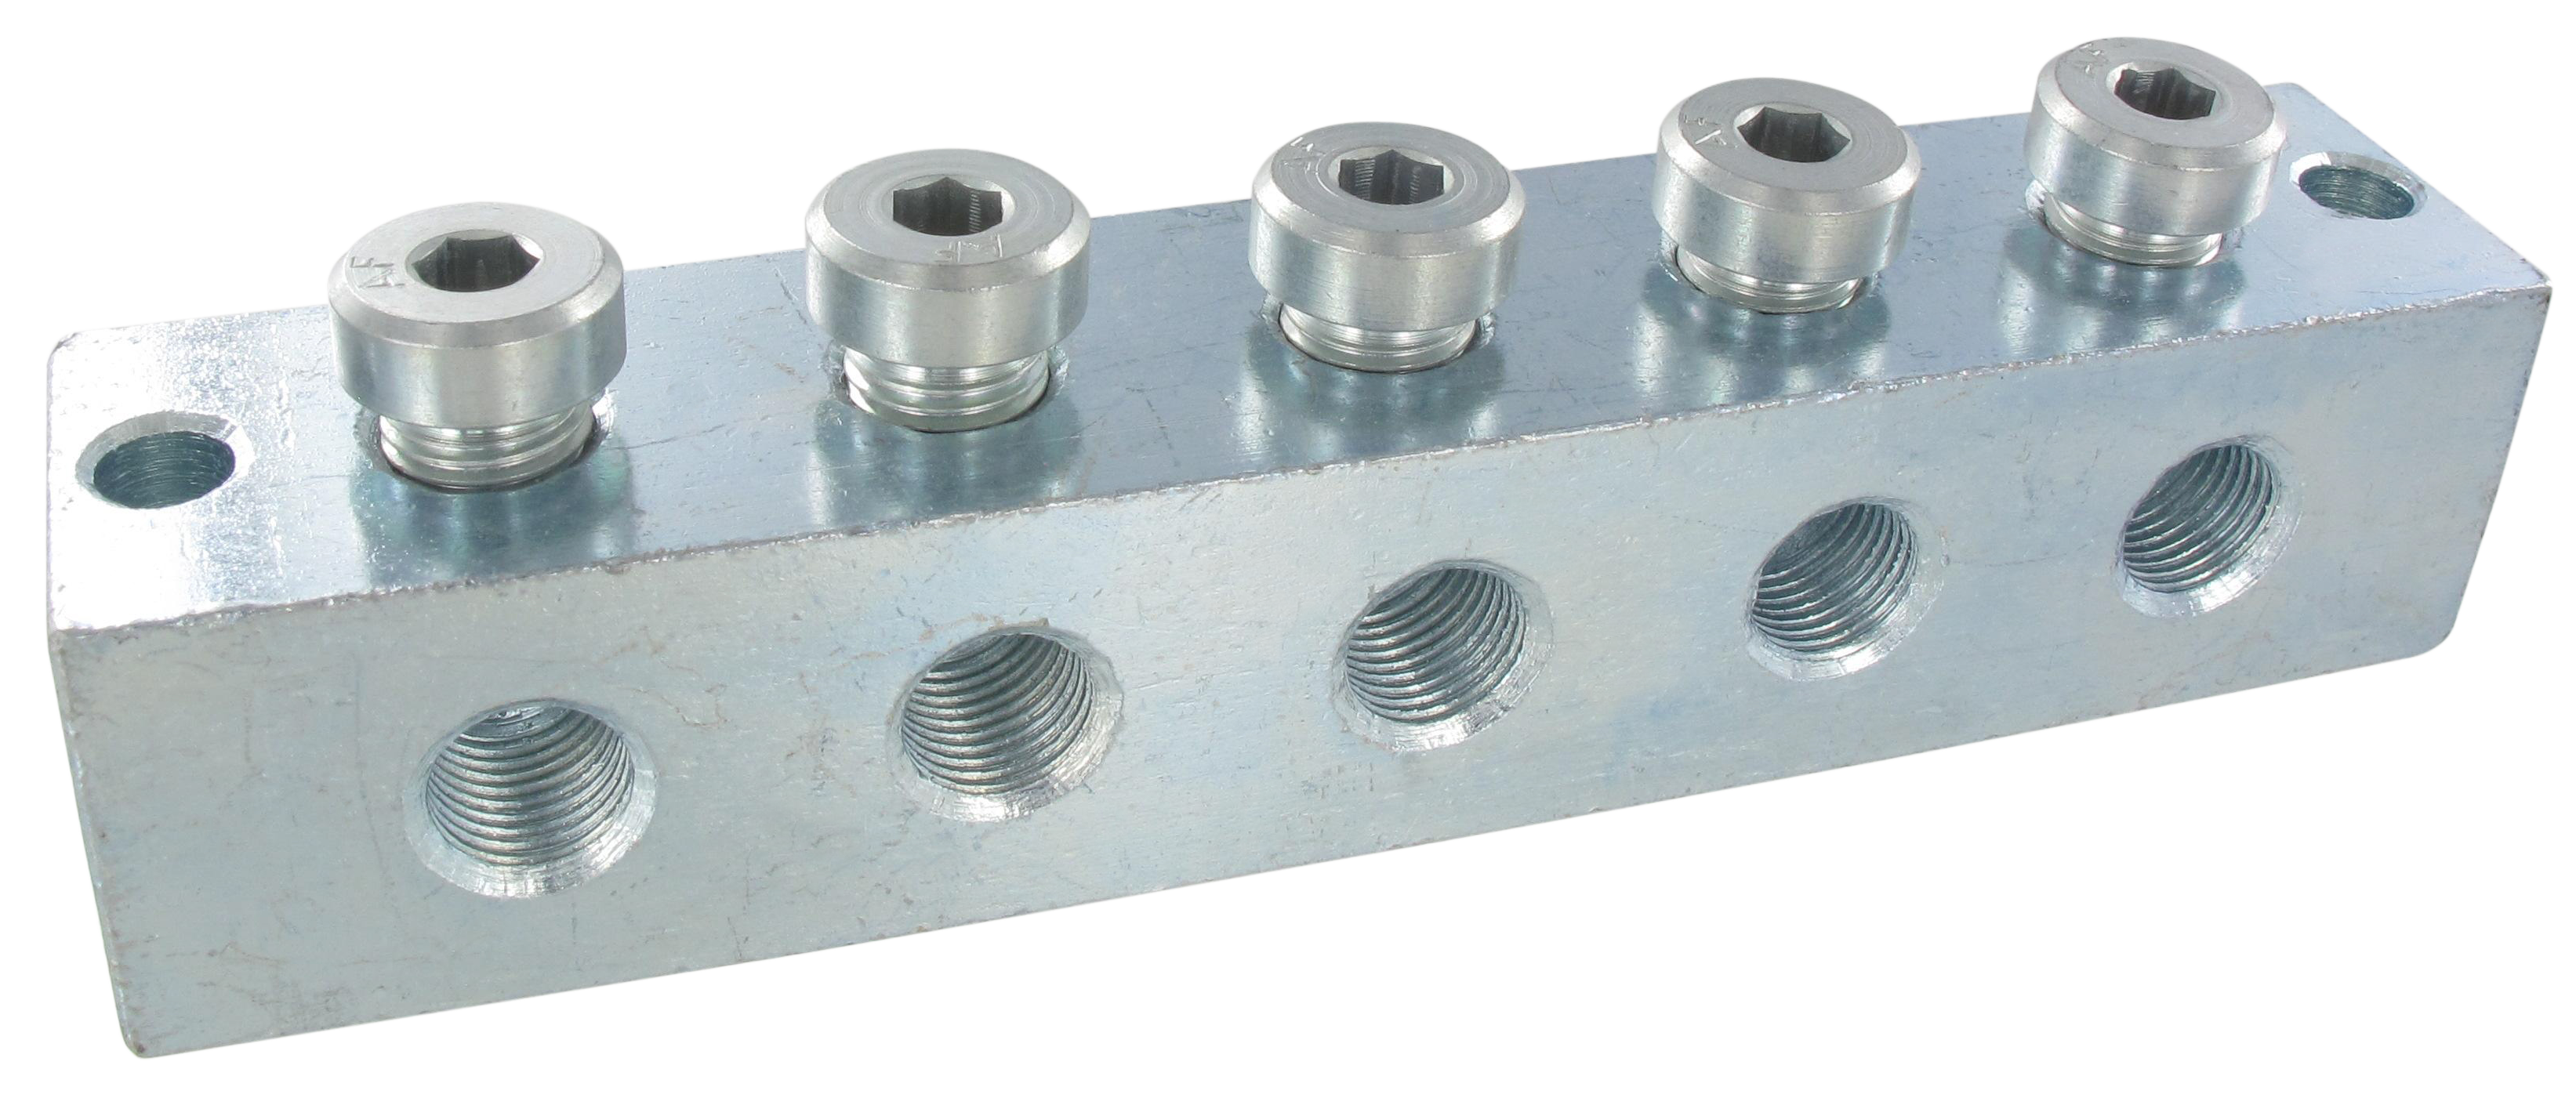 Threaded T-connector manifolds M10x1 in galvanised steel